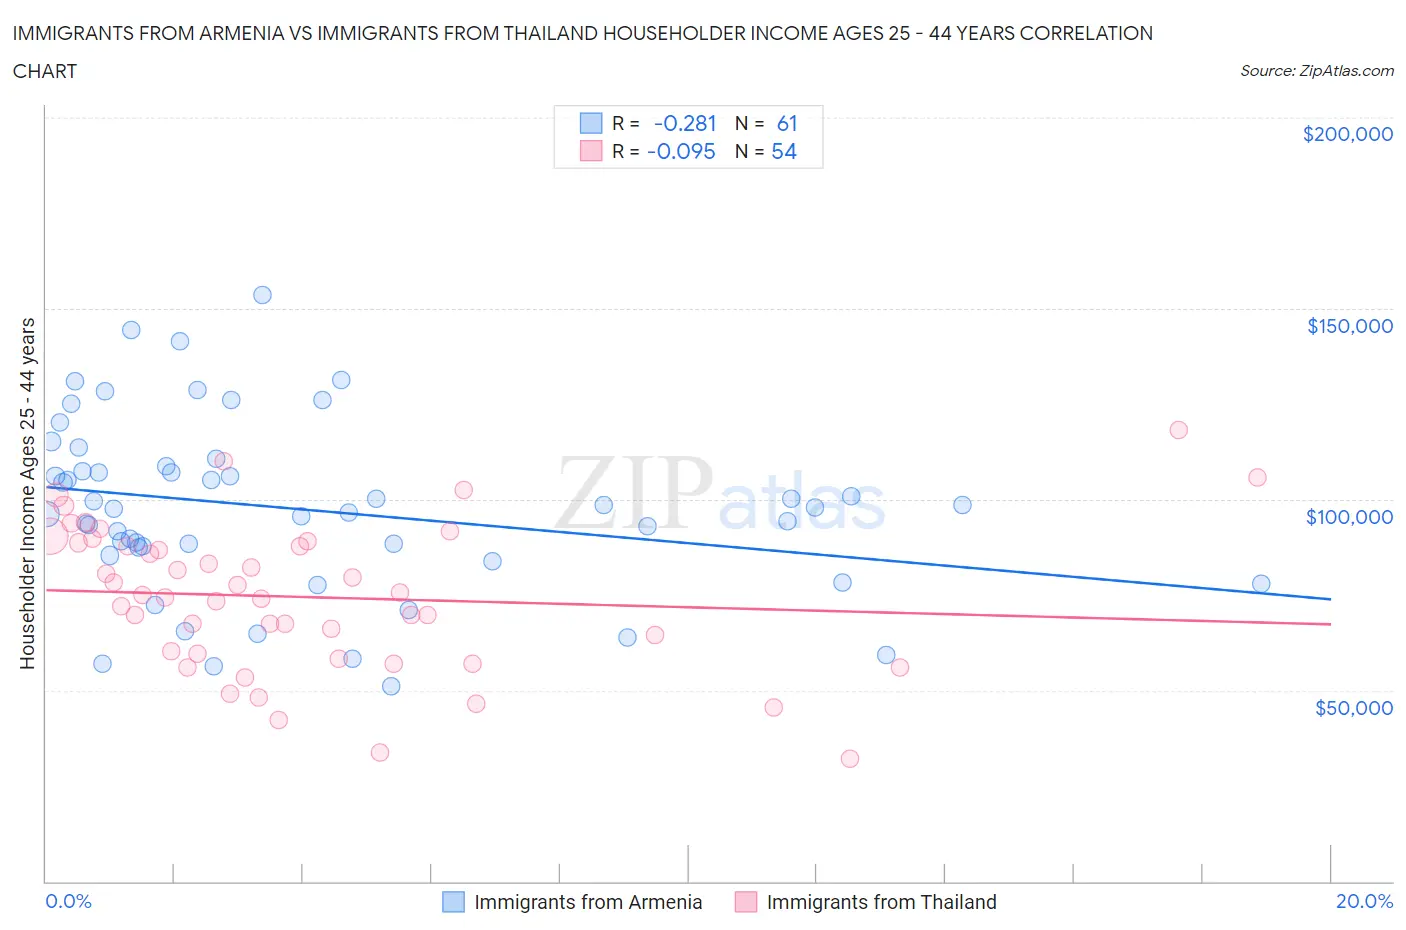 Immigrants from Armenia vs Immigrants from Thailand Householder Income Ages 25 - 44 years